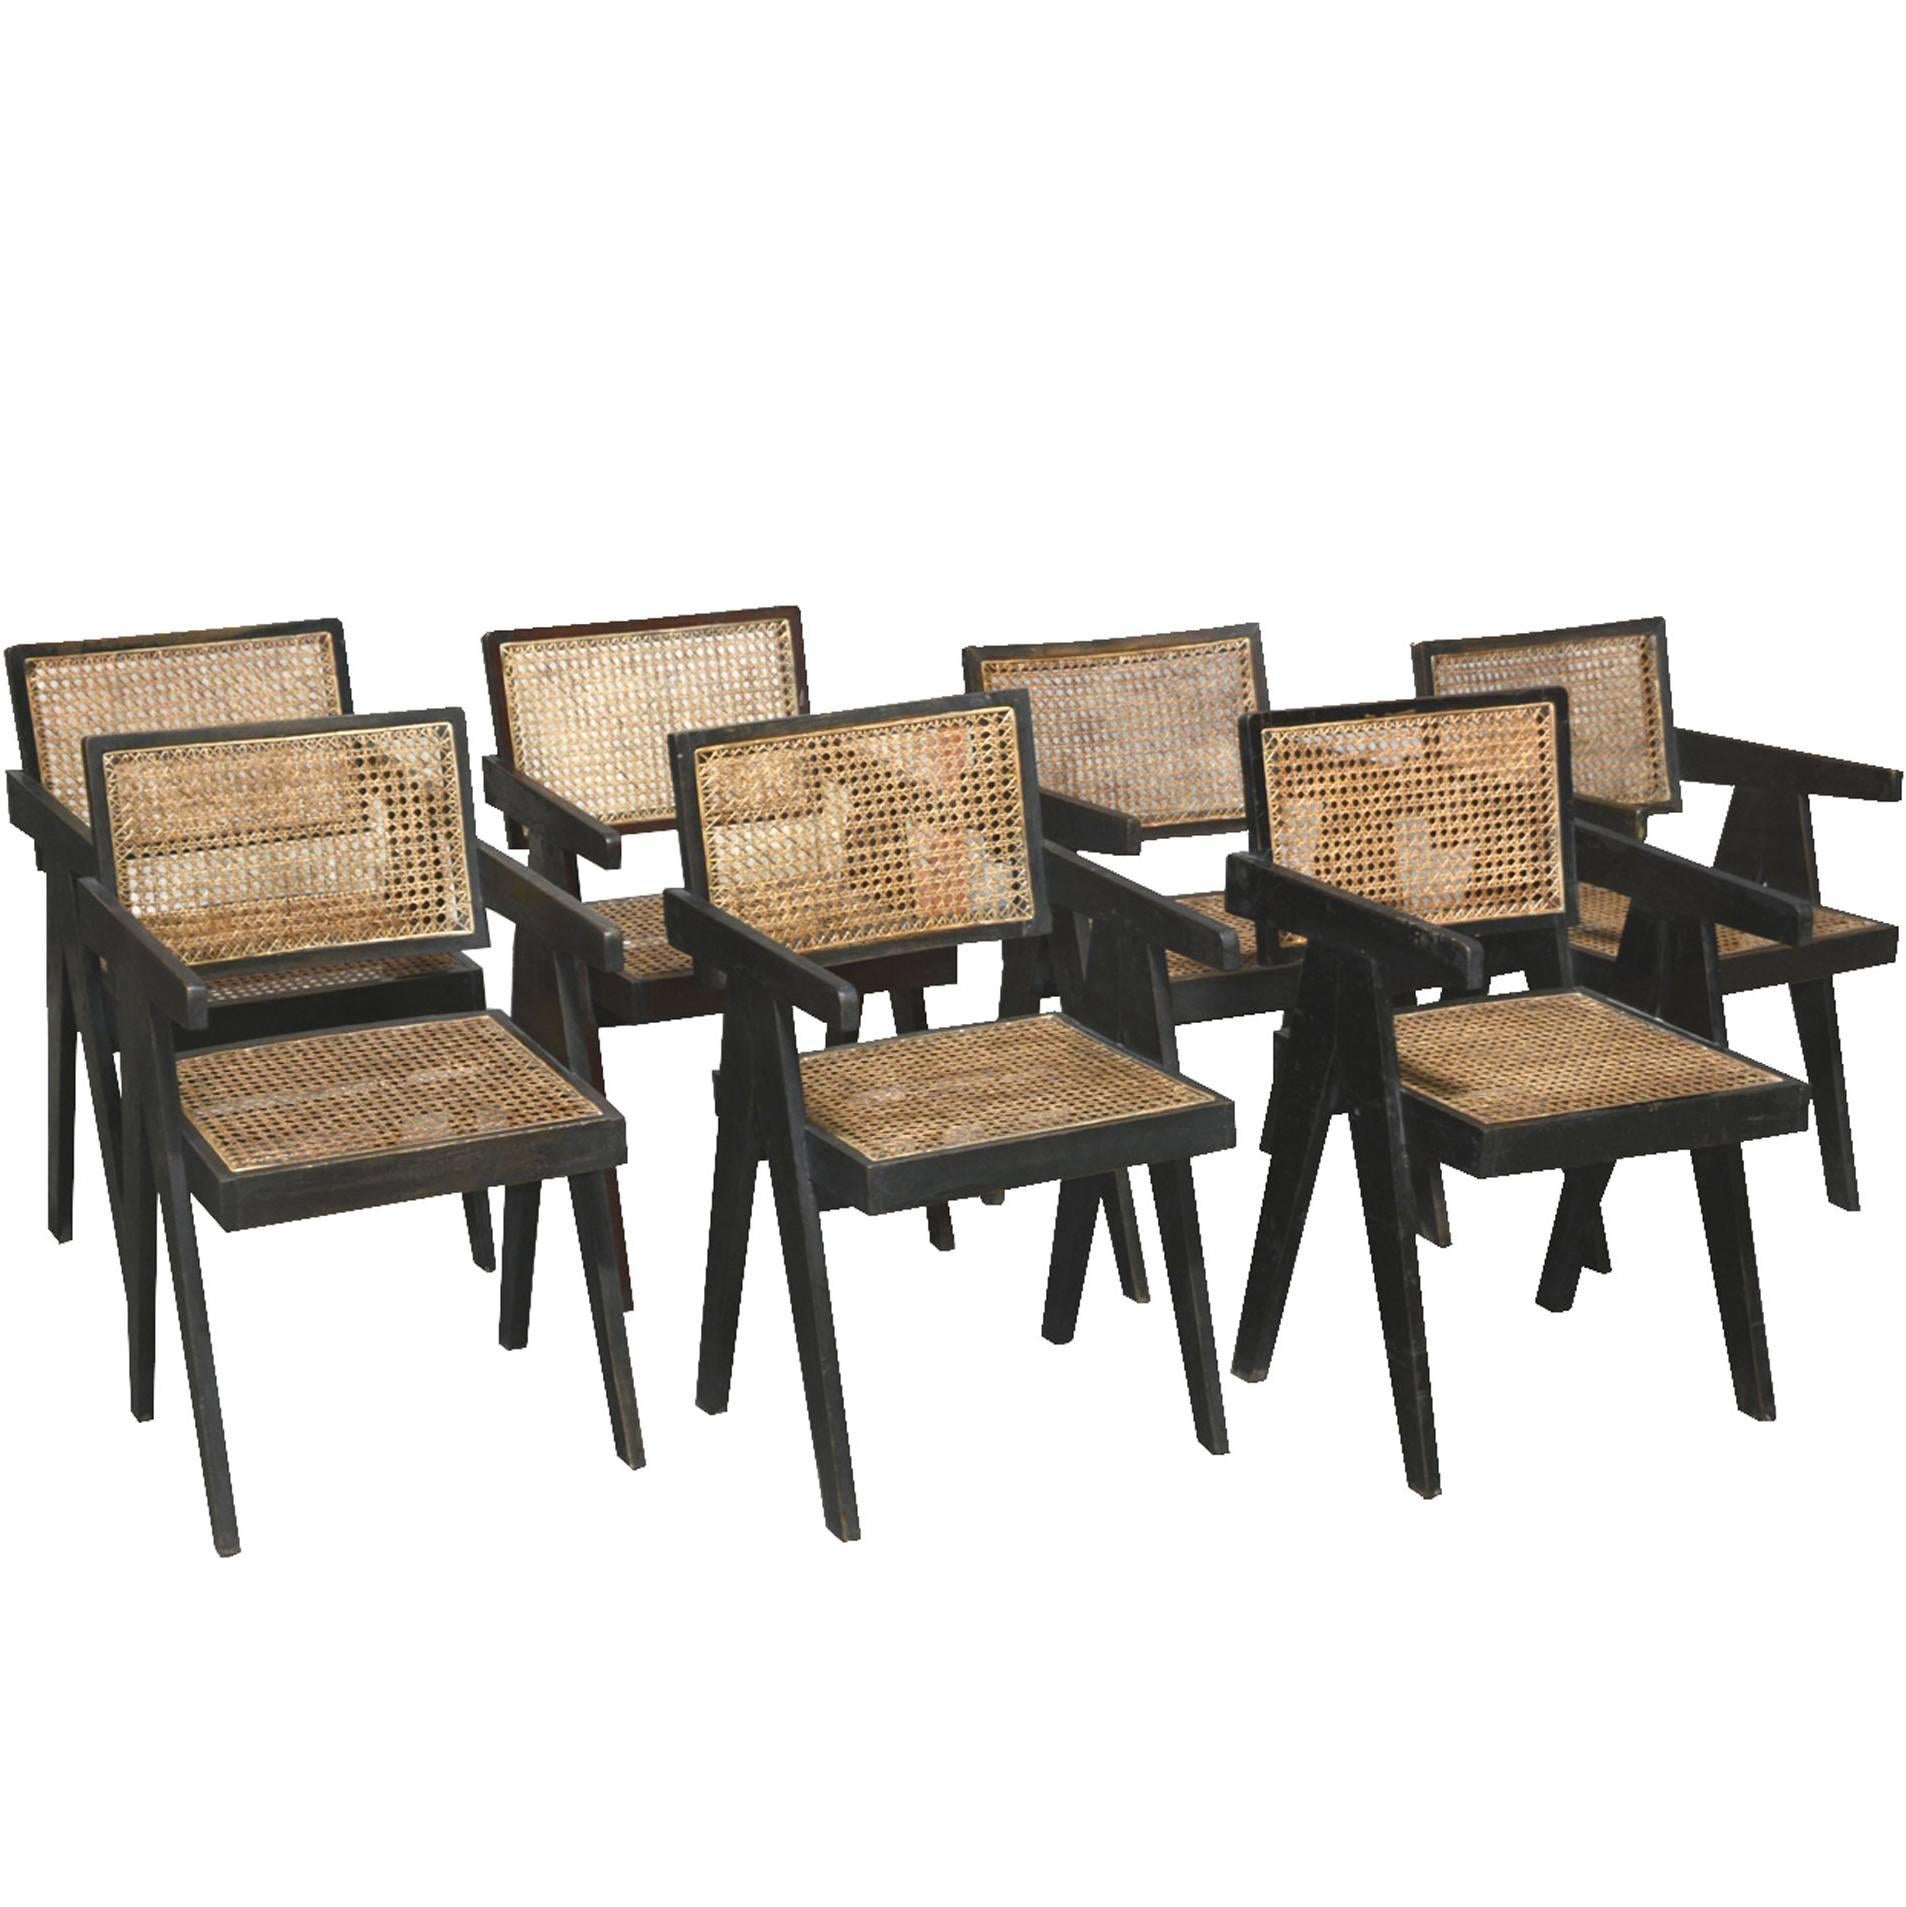 Pierre Jeanneret, Rare Set of five Office Chairs in Their Original Condition